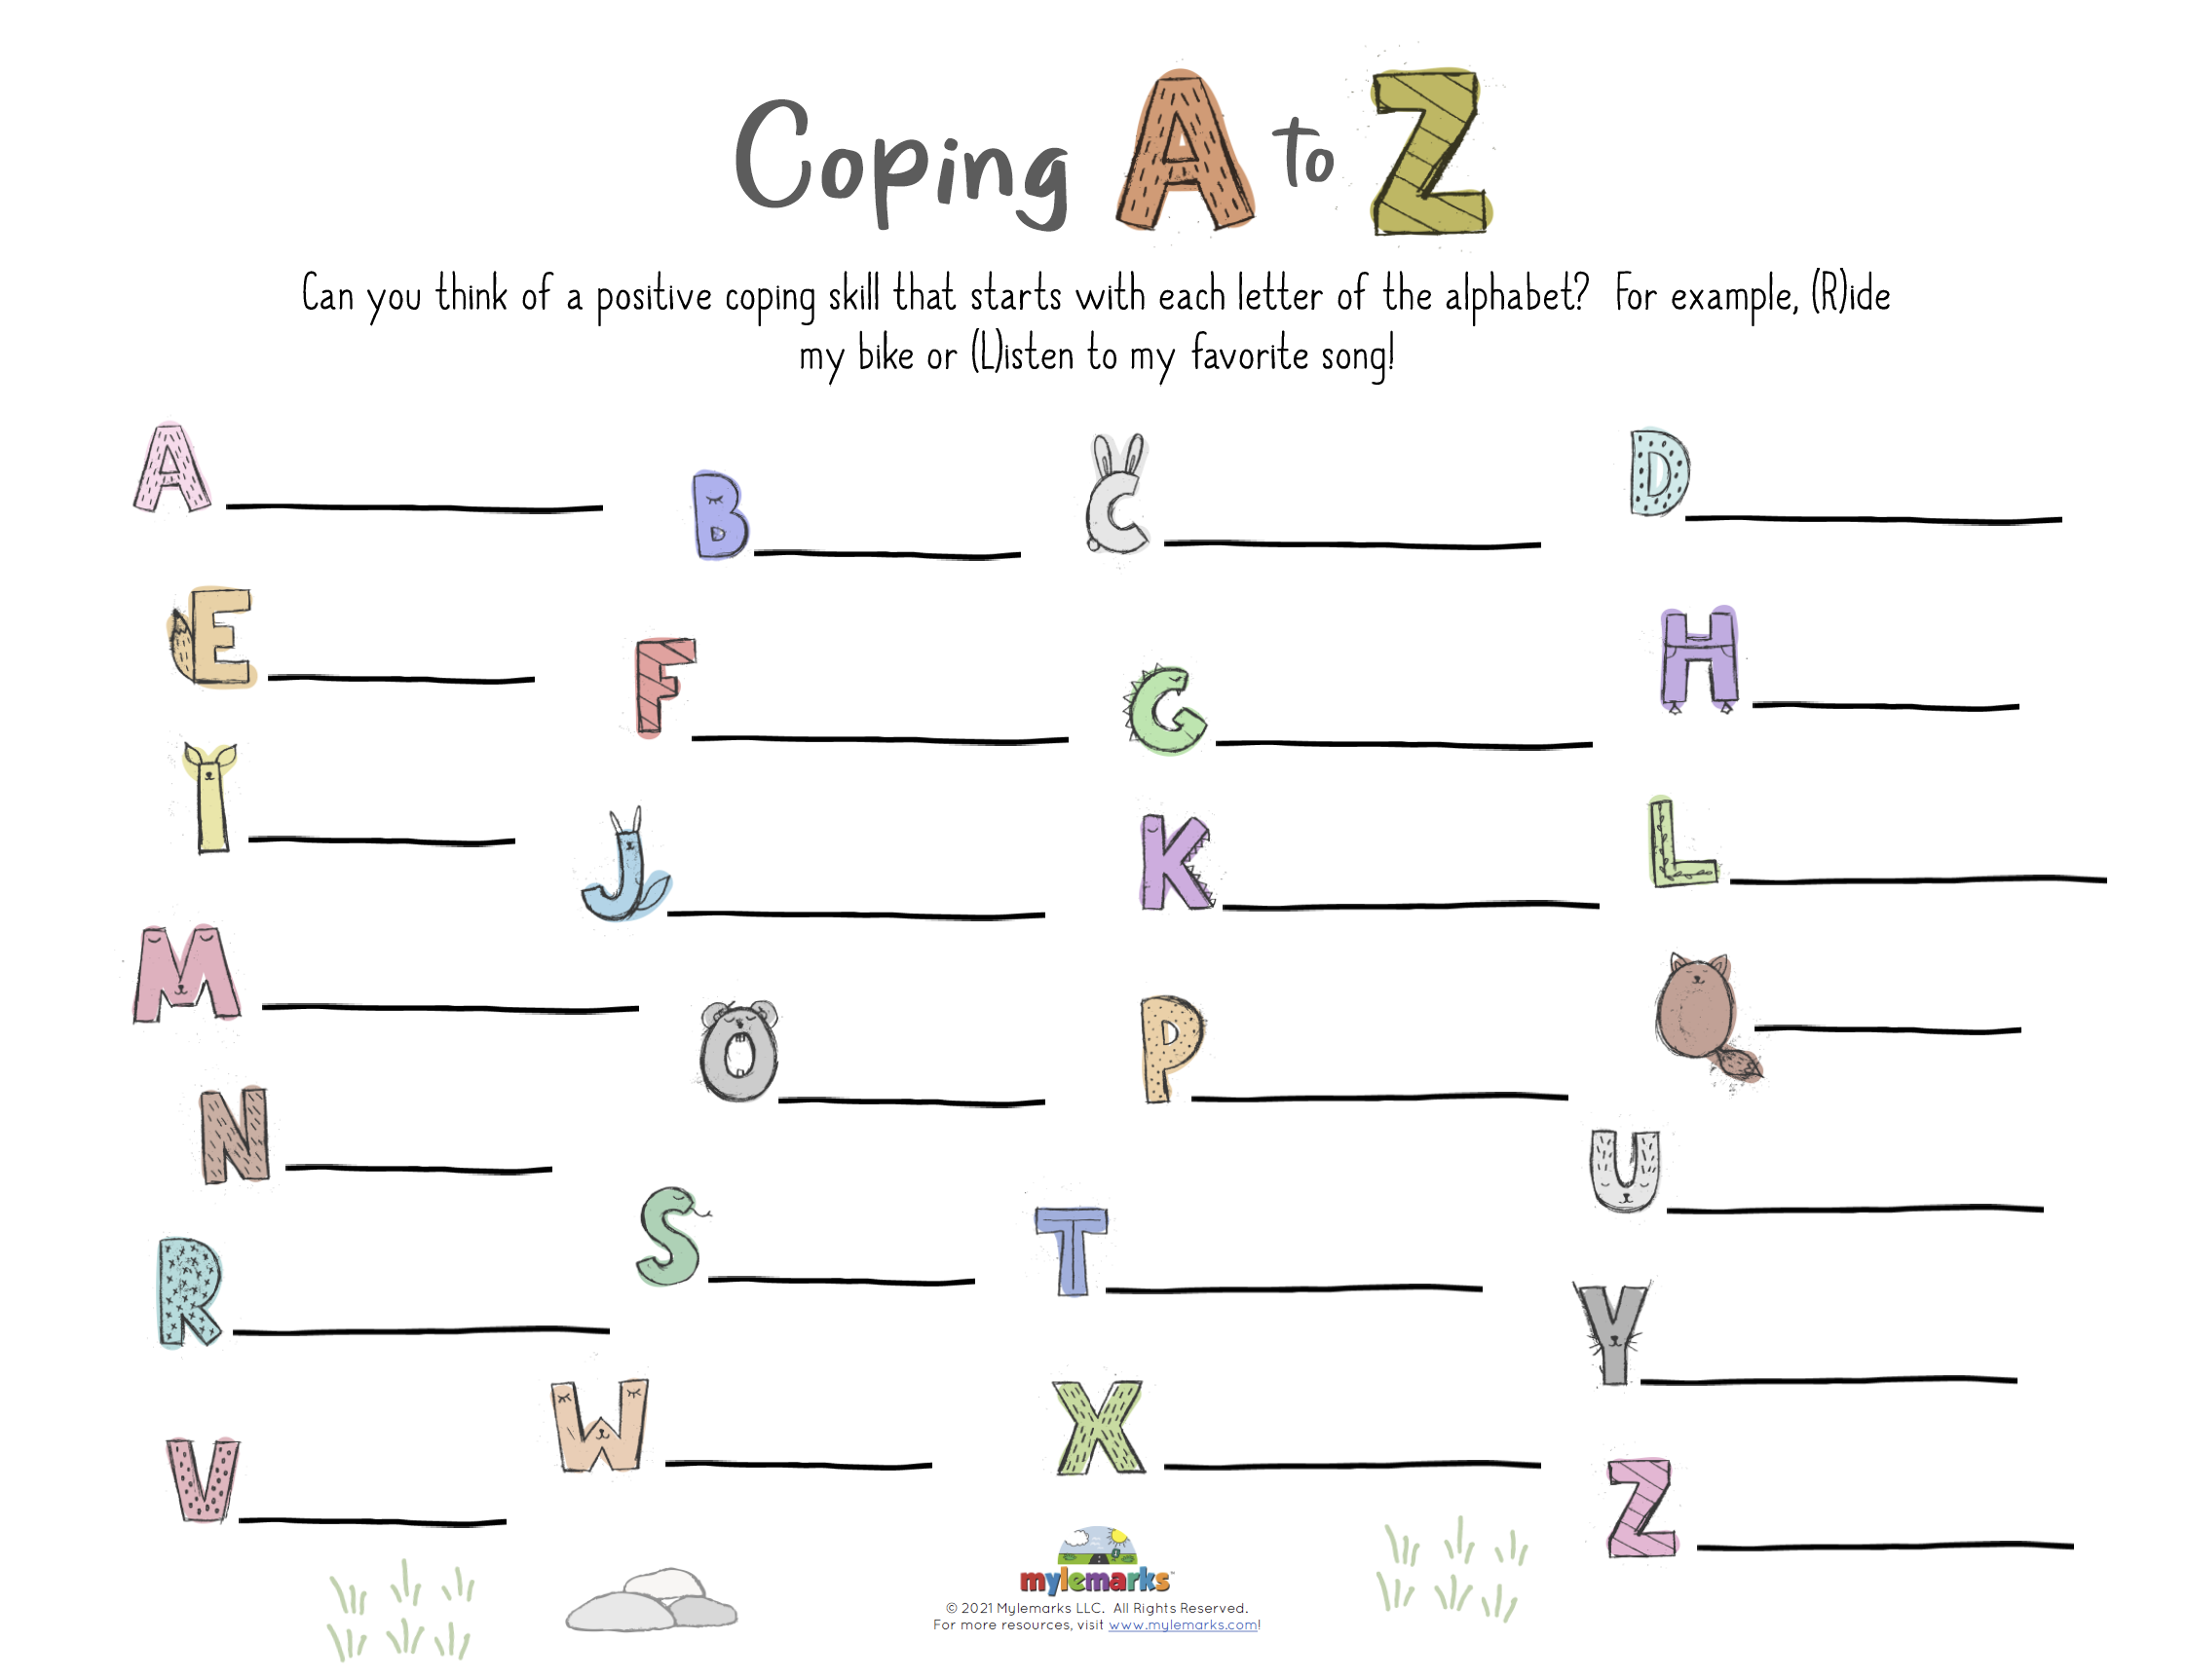 Coping A to Z! [F]